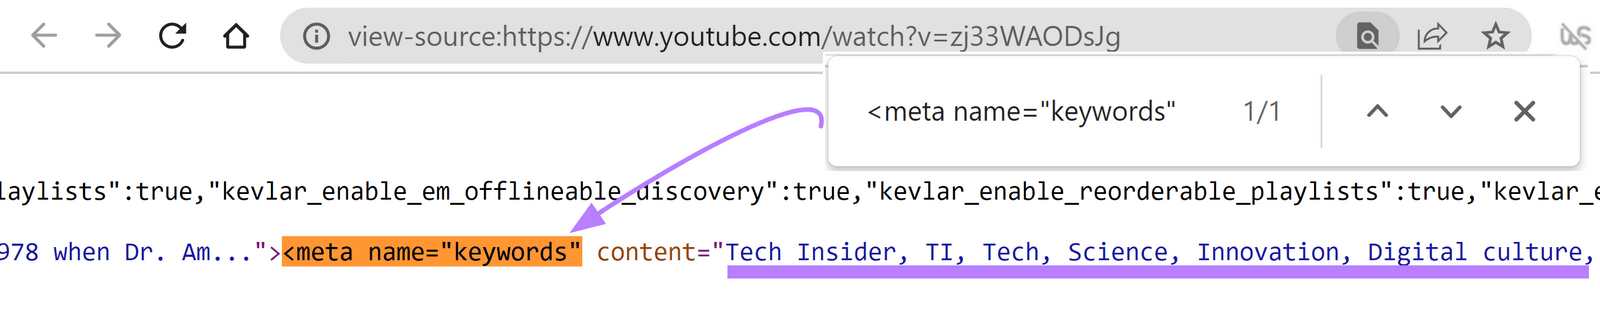 results for <meta name=“keywords” search in HTML source code